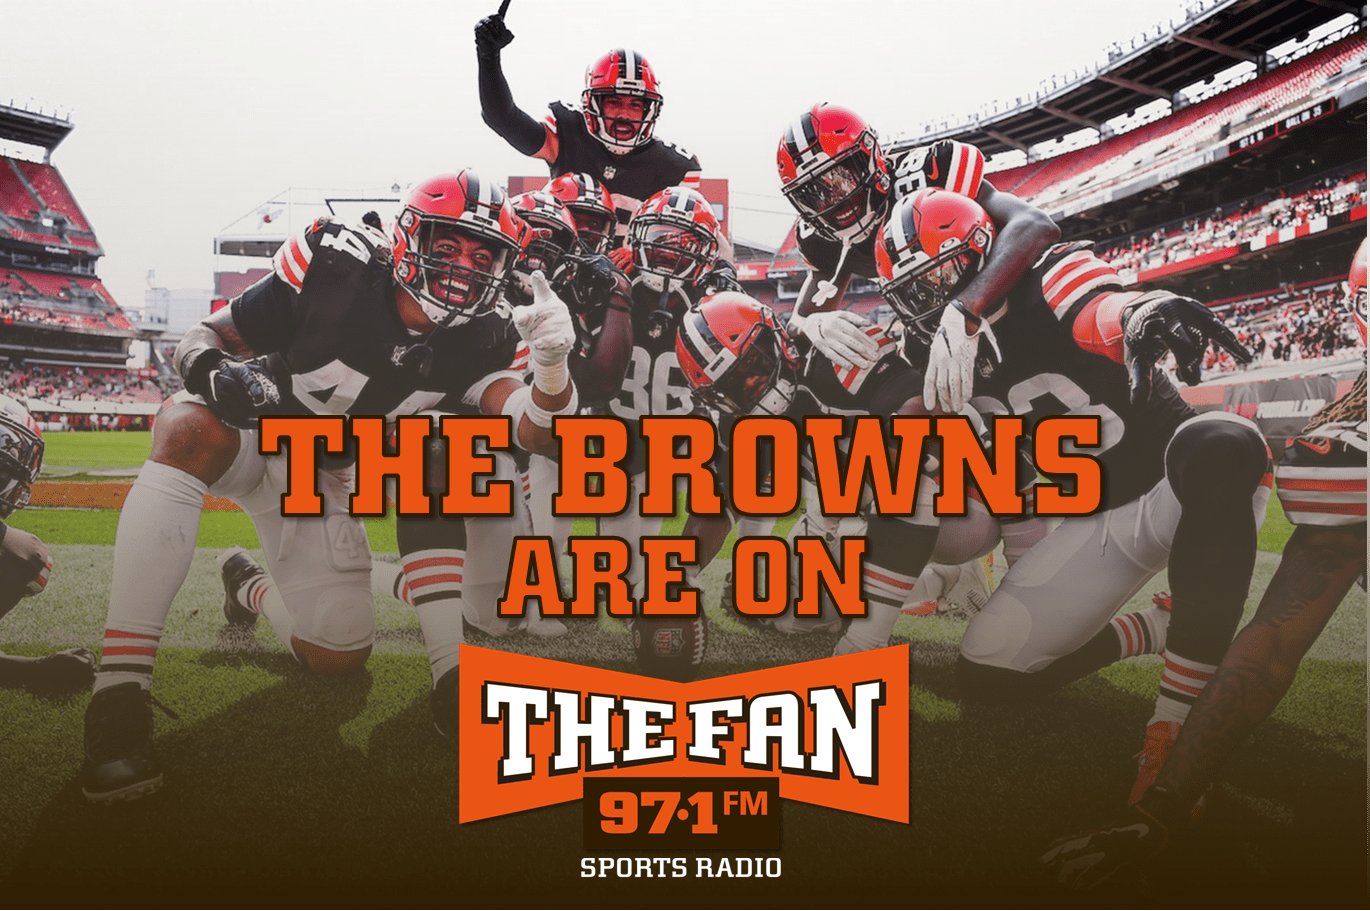 Cleveland Browns on The Fan